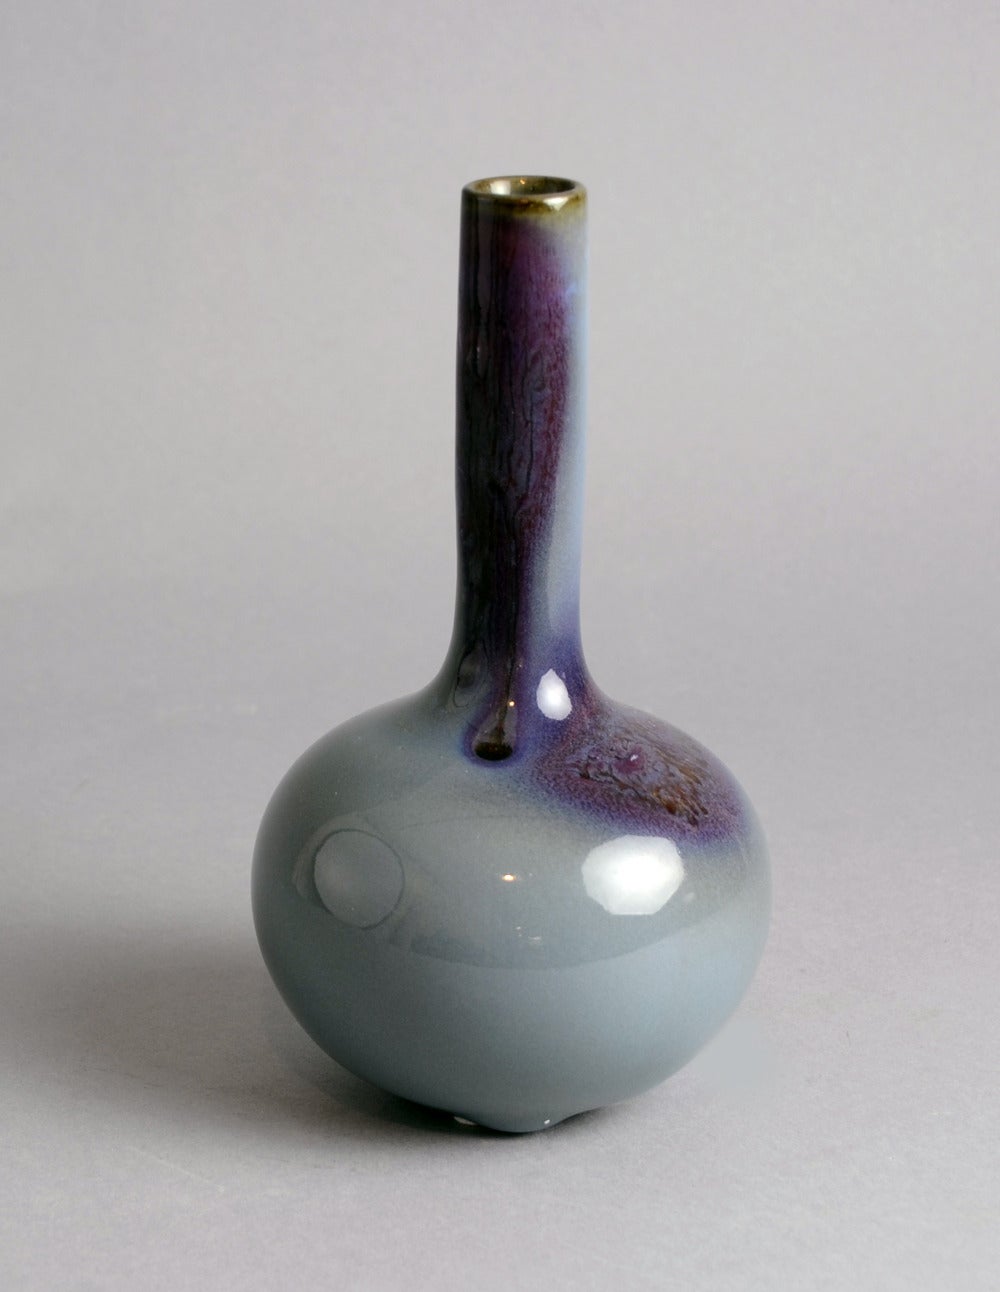 Unique stoneware vase with glossy blue and purple glaze, circa 1930s.
Height 8 1/2" (22cm), width 4 1/2" (12cm),
Incised "572", "SALTO", painted three waves.
$3800 No. N9711.